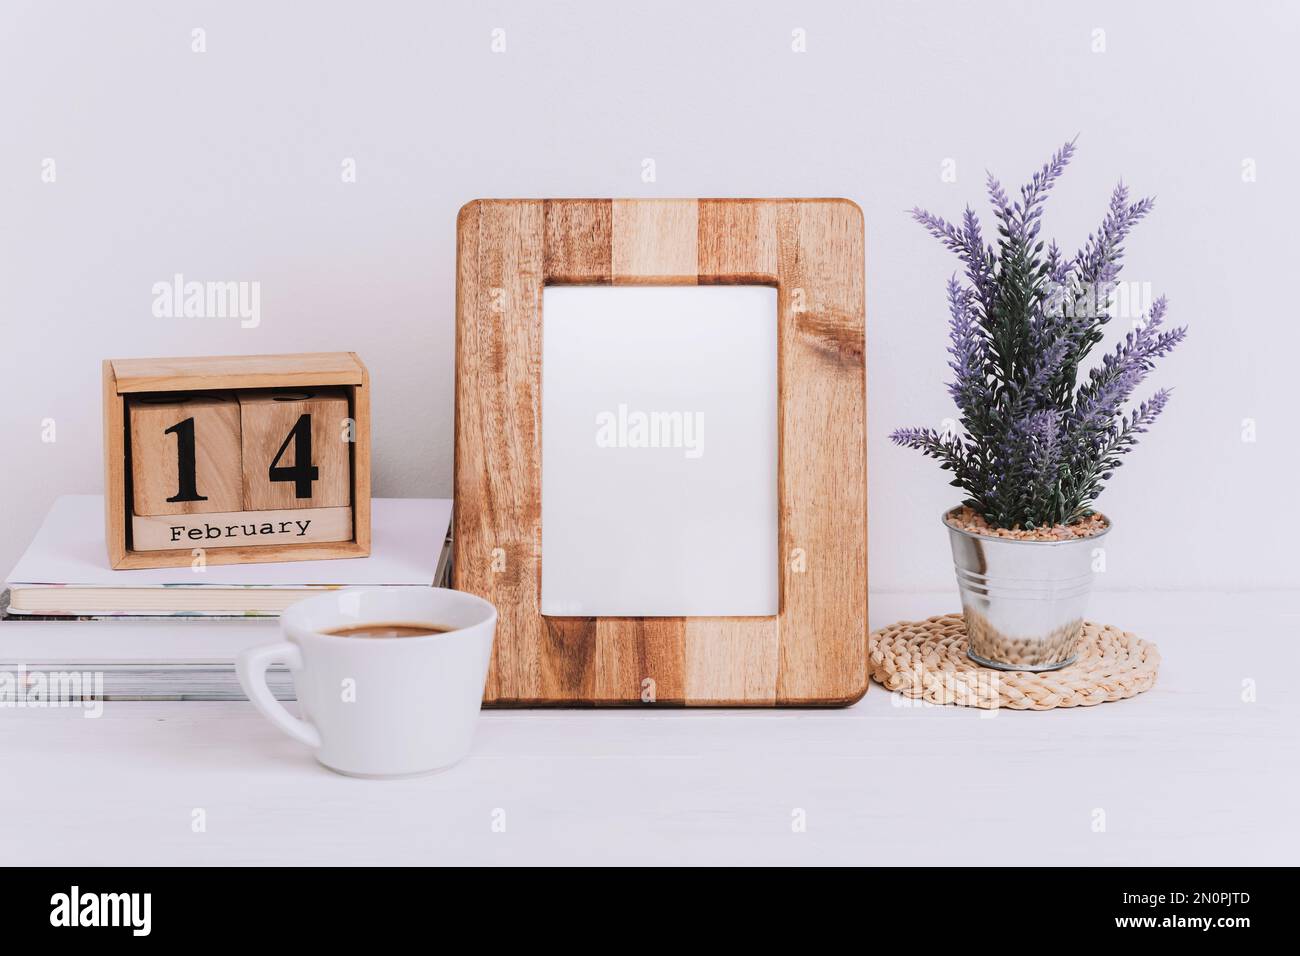 Mockup wooden picture frame and block calendar with Valentines day holiday date. Coffee cup, flowers in pot on white table. Copy space. Stock Photo